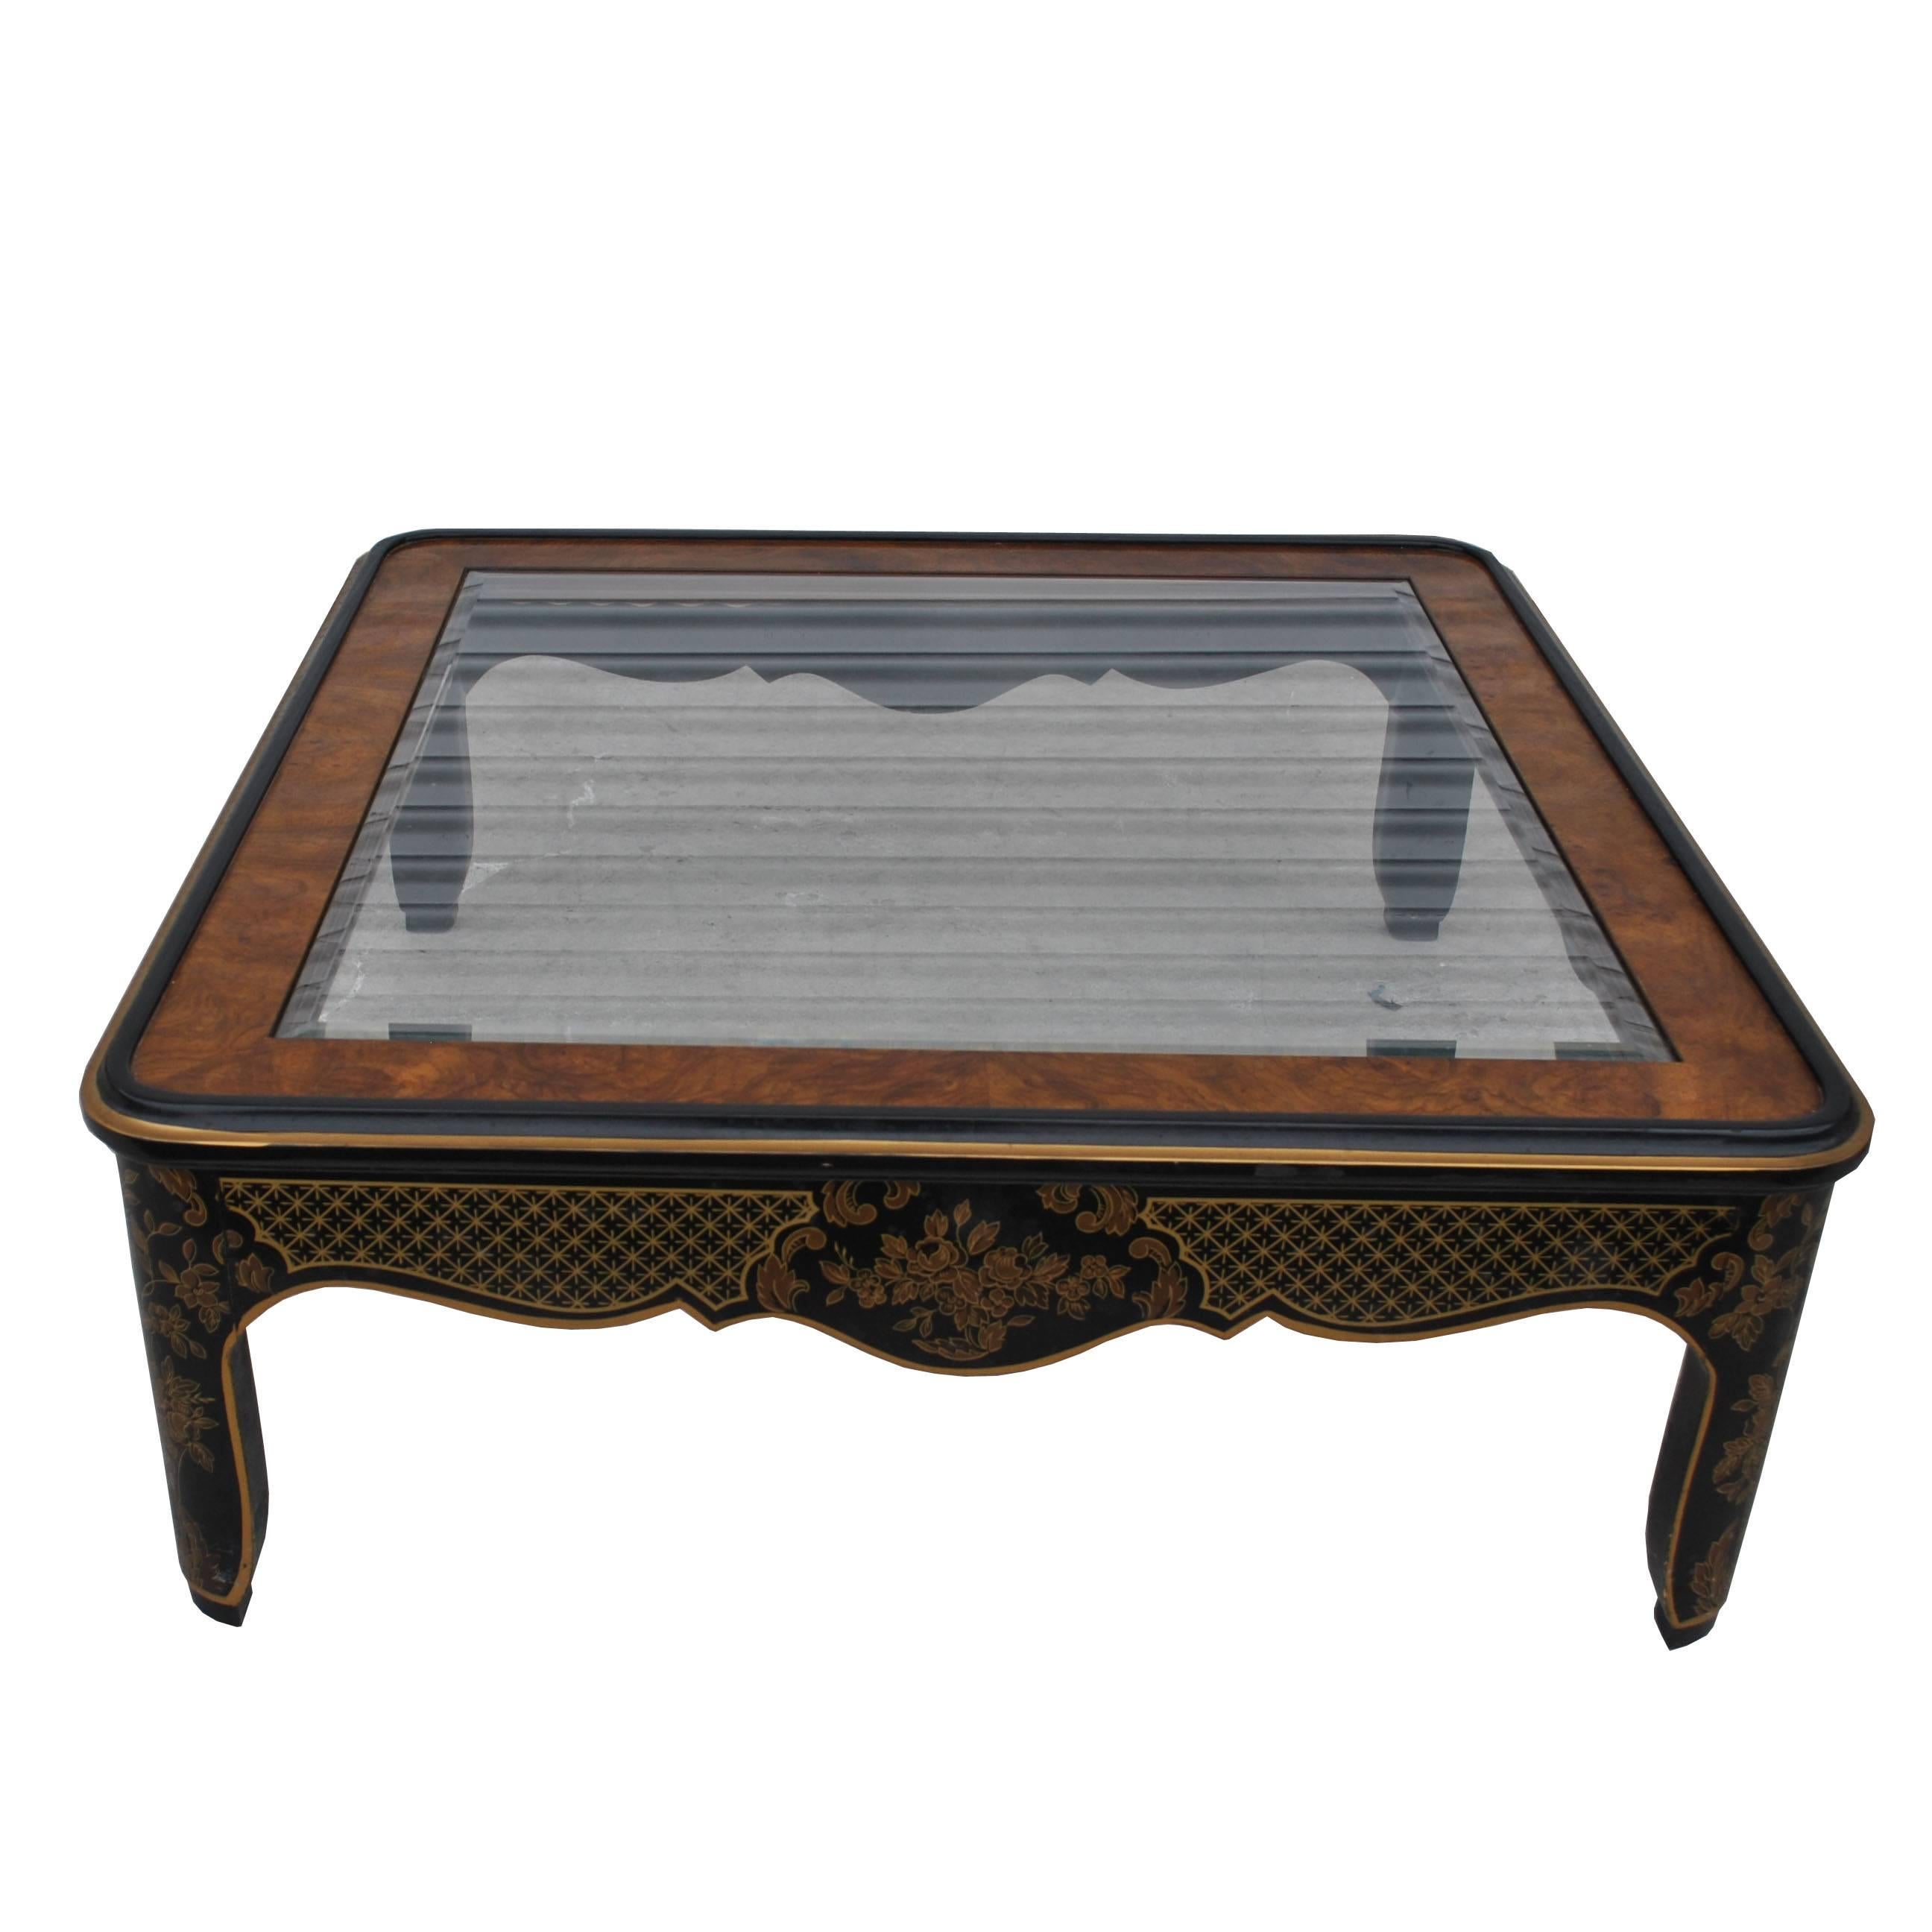 A square coffee table made by Drexel with Asian lines, decorated with Asian motifs, and a beveld glass top.